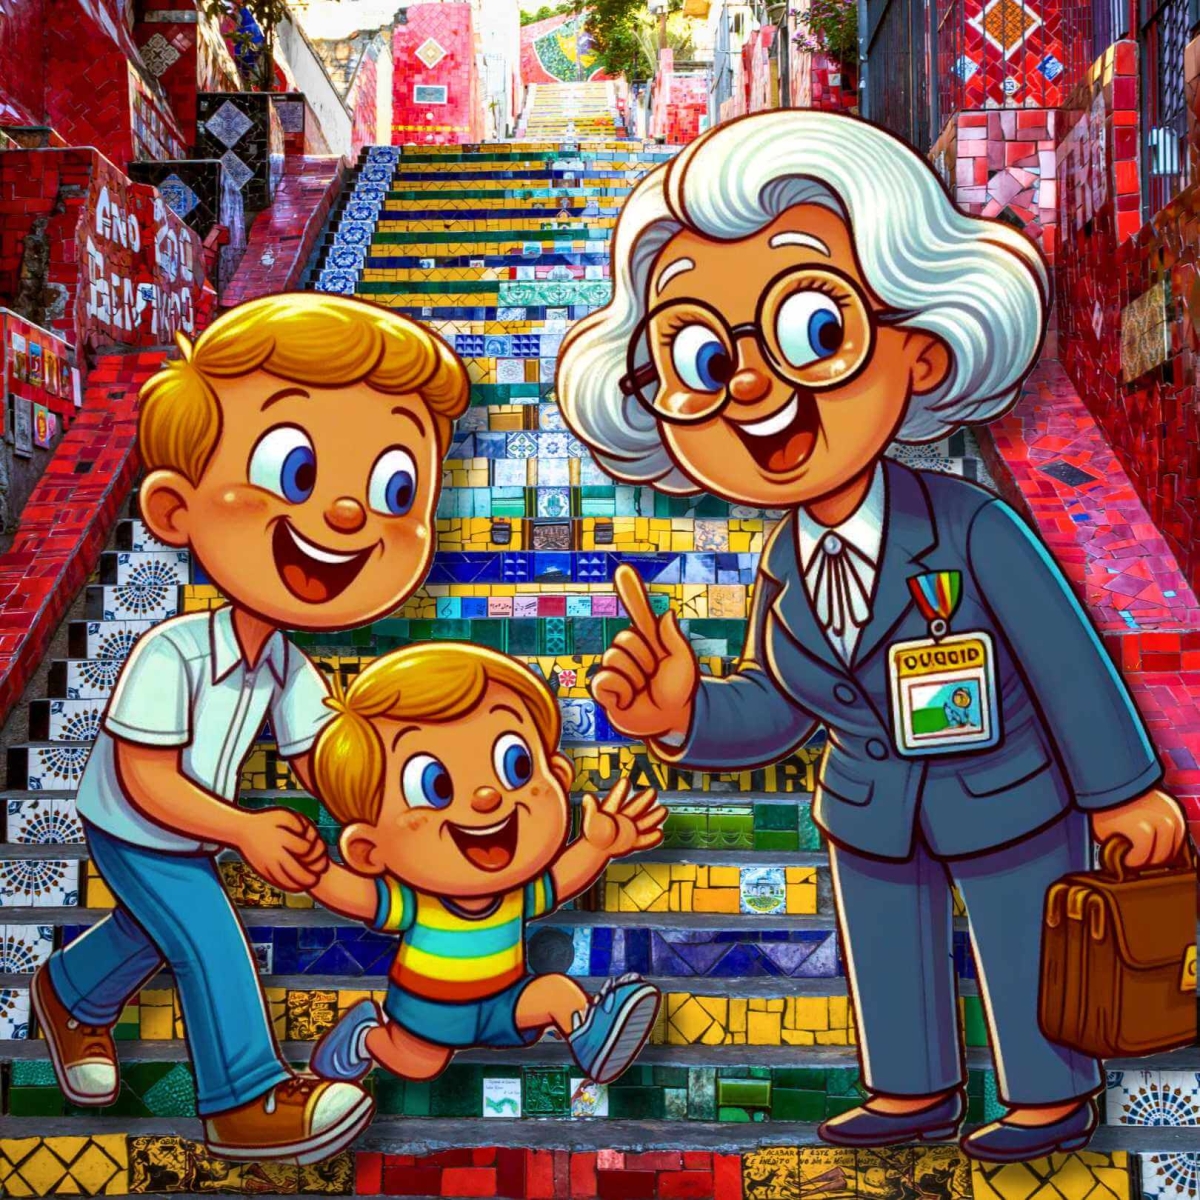  A parent asks an aged tour guide in Rio to watch their child while they take a quick detour on a personal walking tour.​